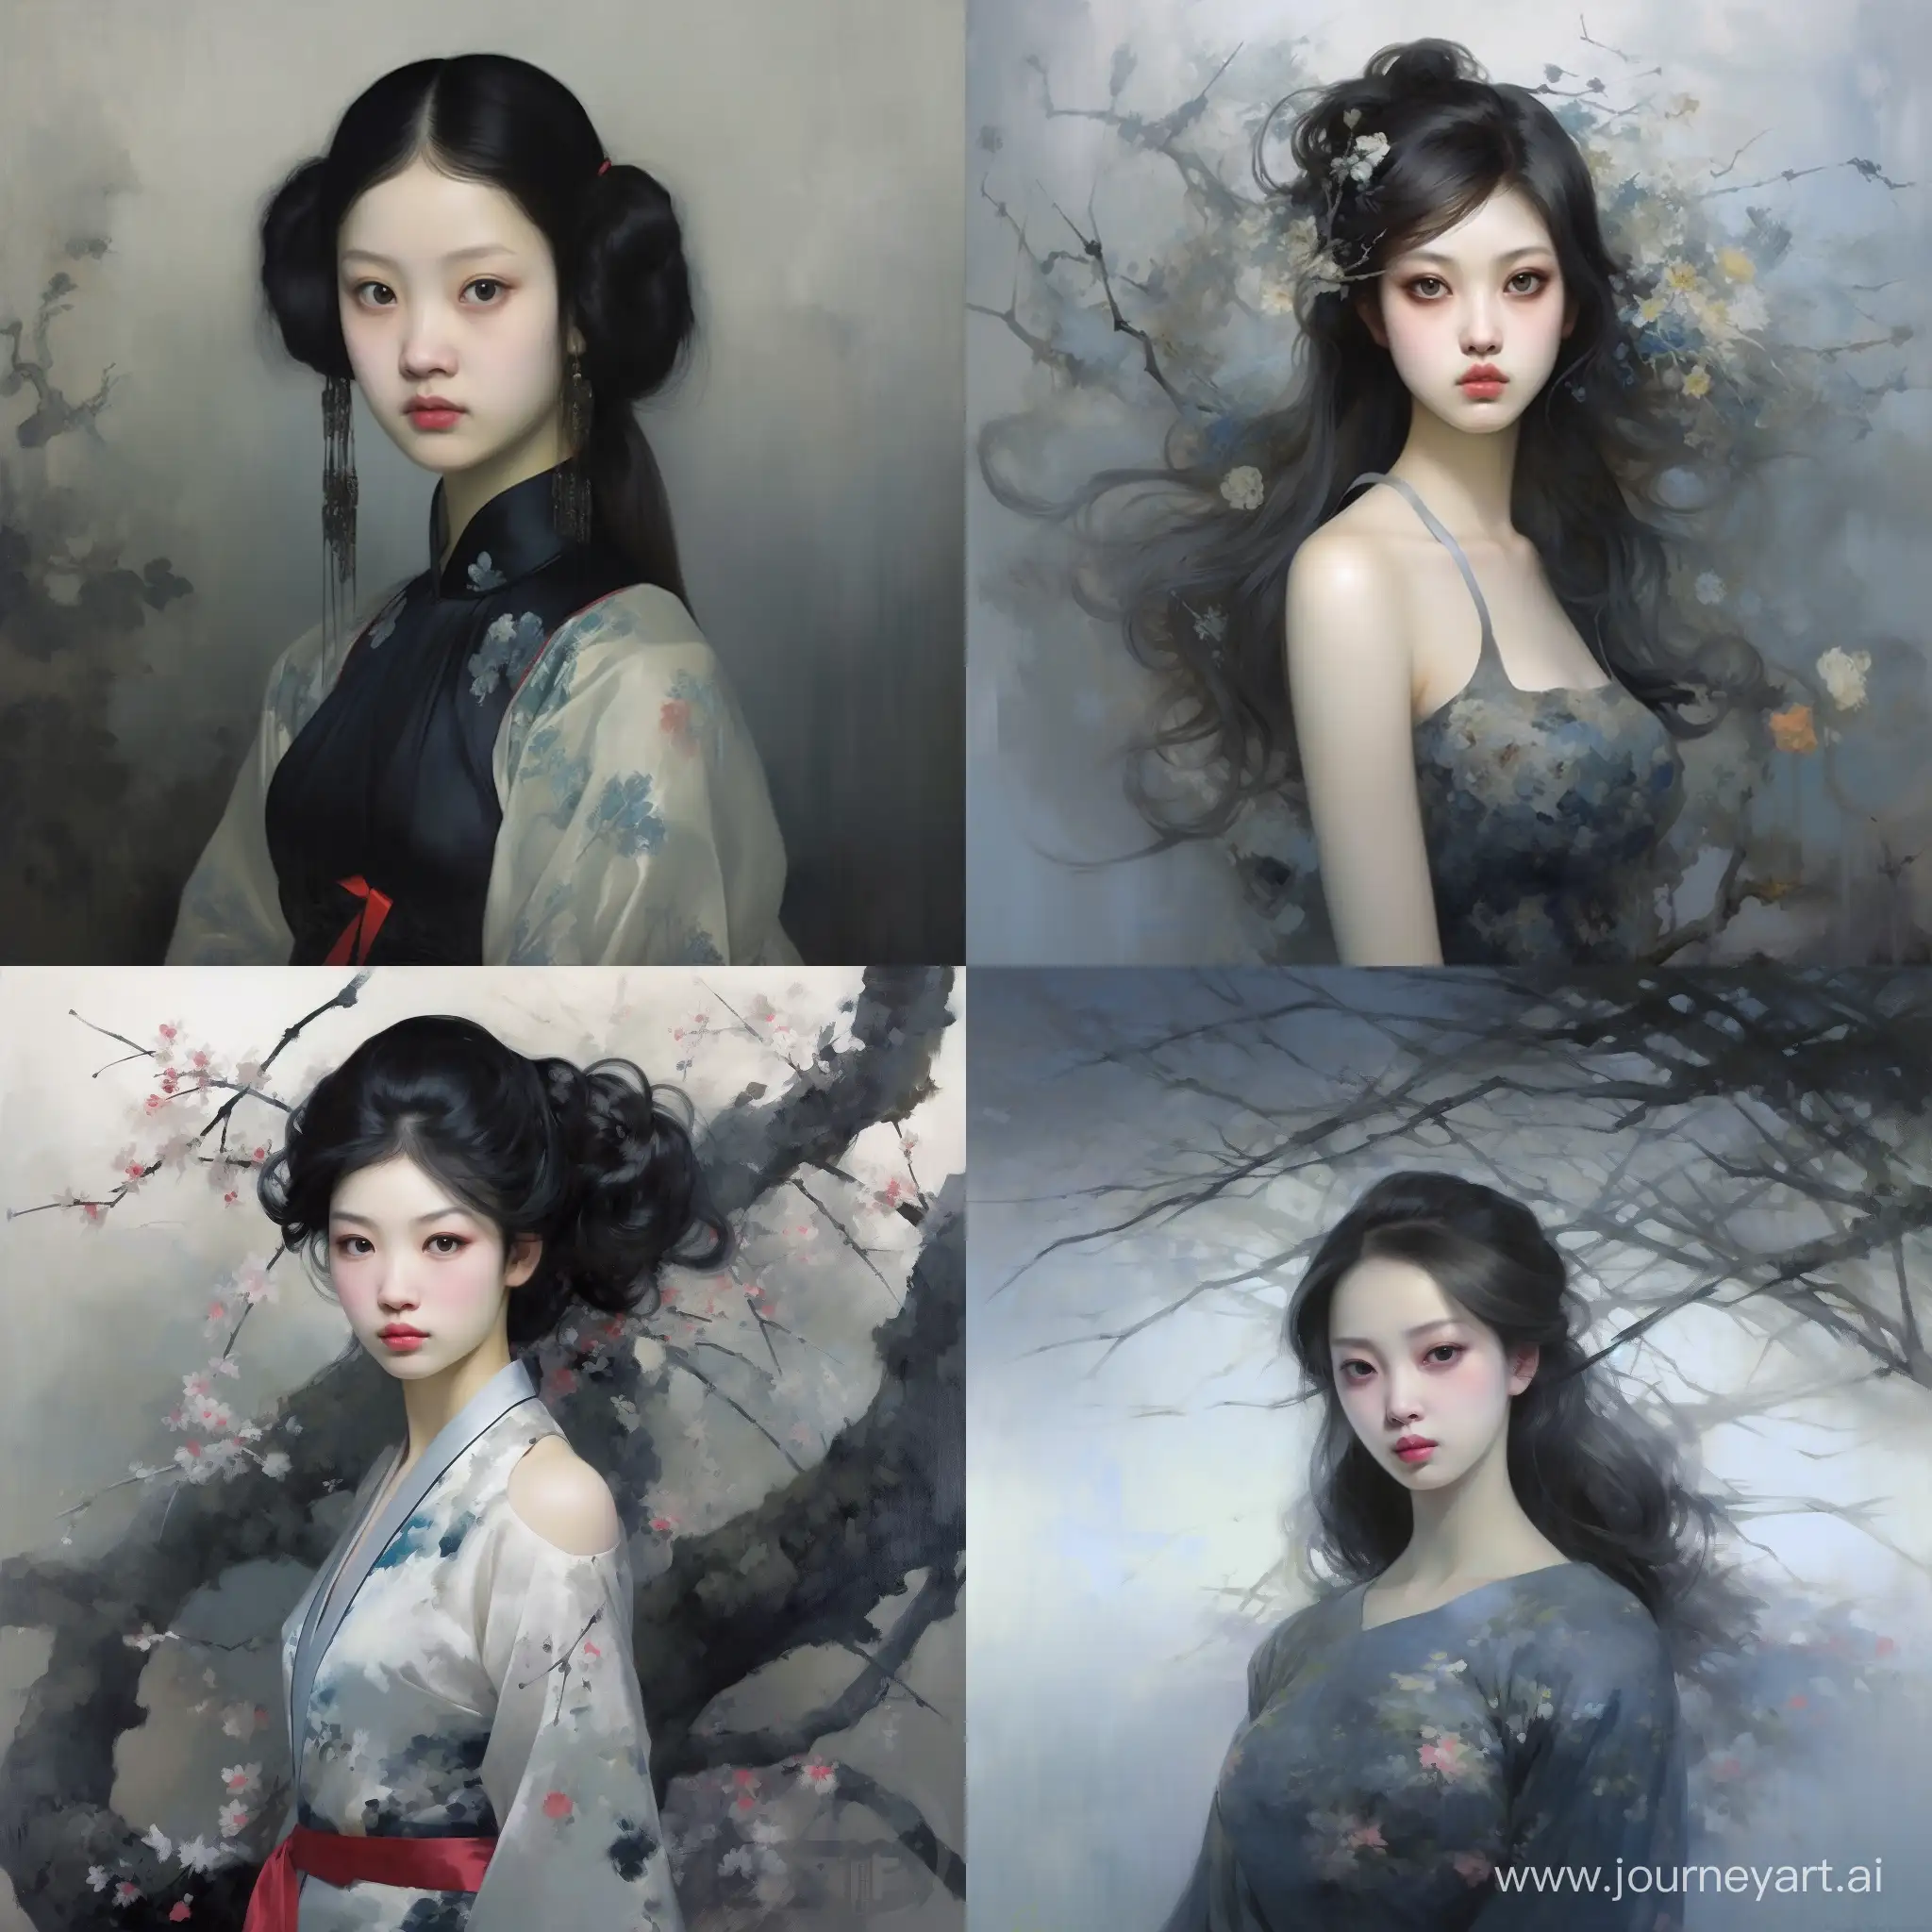 Li-Yitong-Portrait-in-11-Aspect-Ratio-Capturing-Elegance-with-10000-Nuances